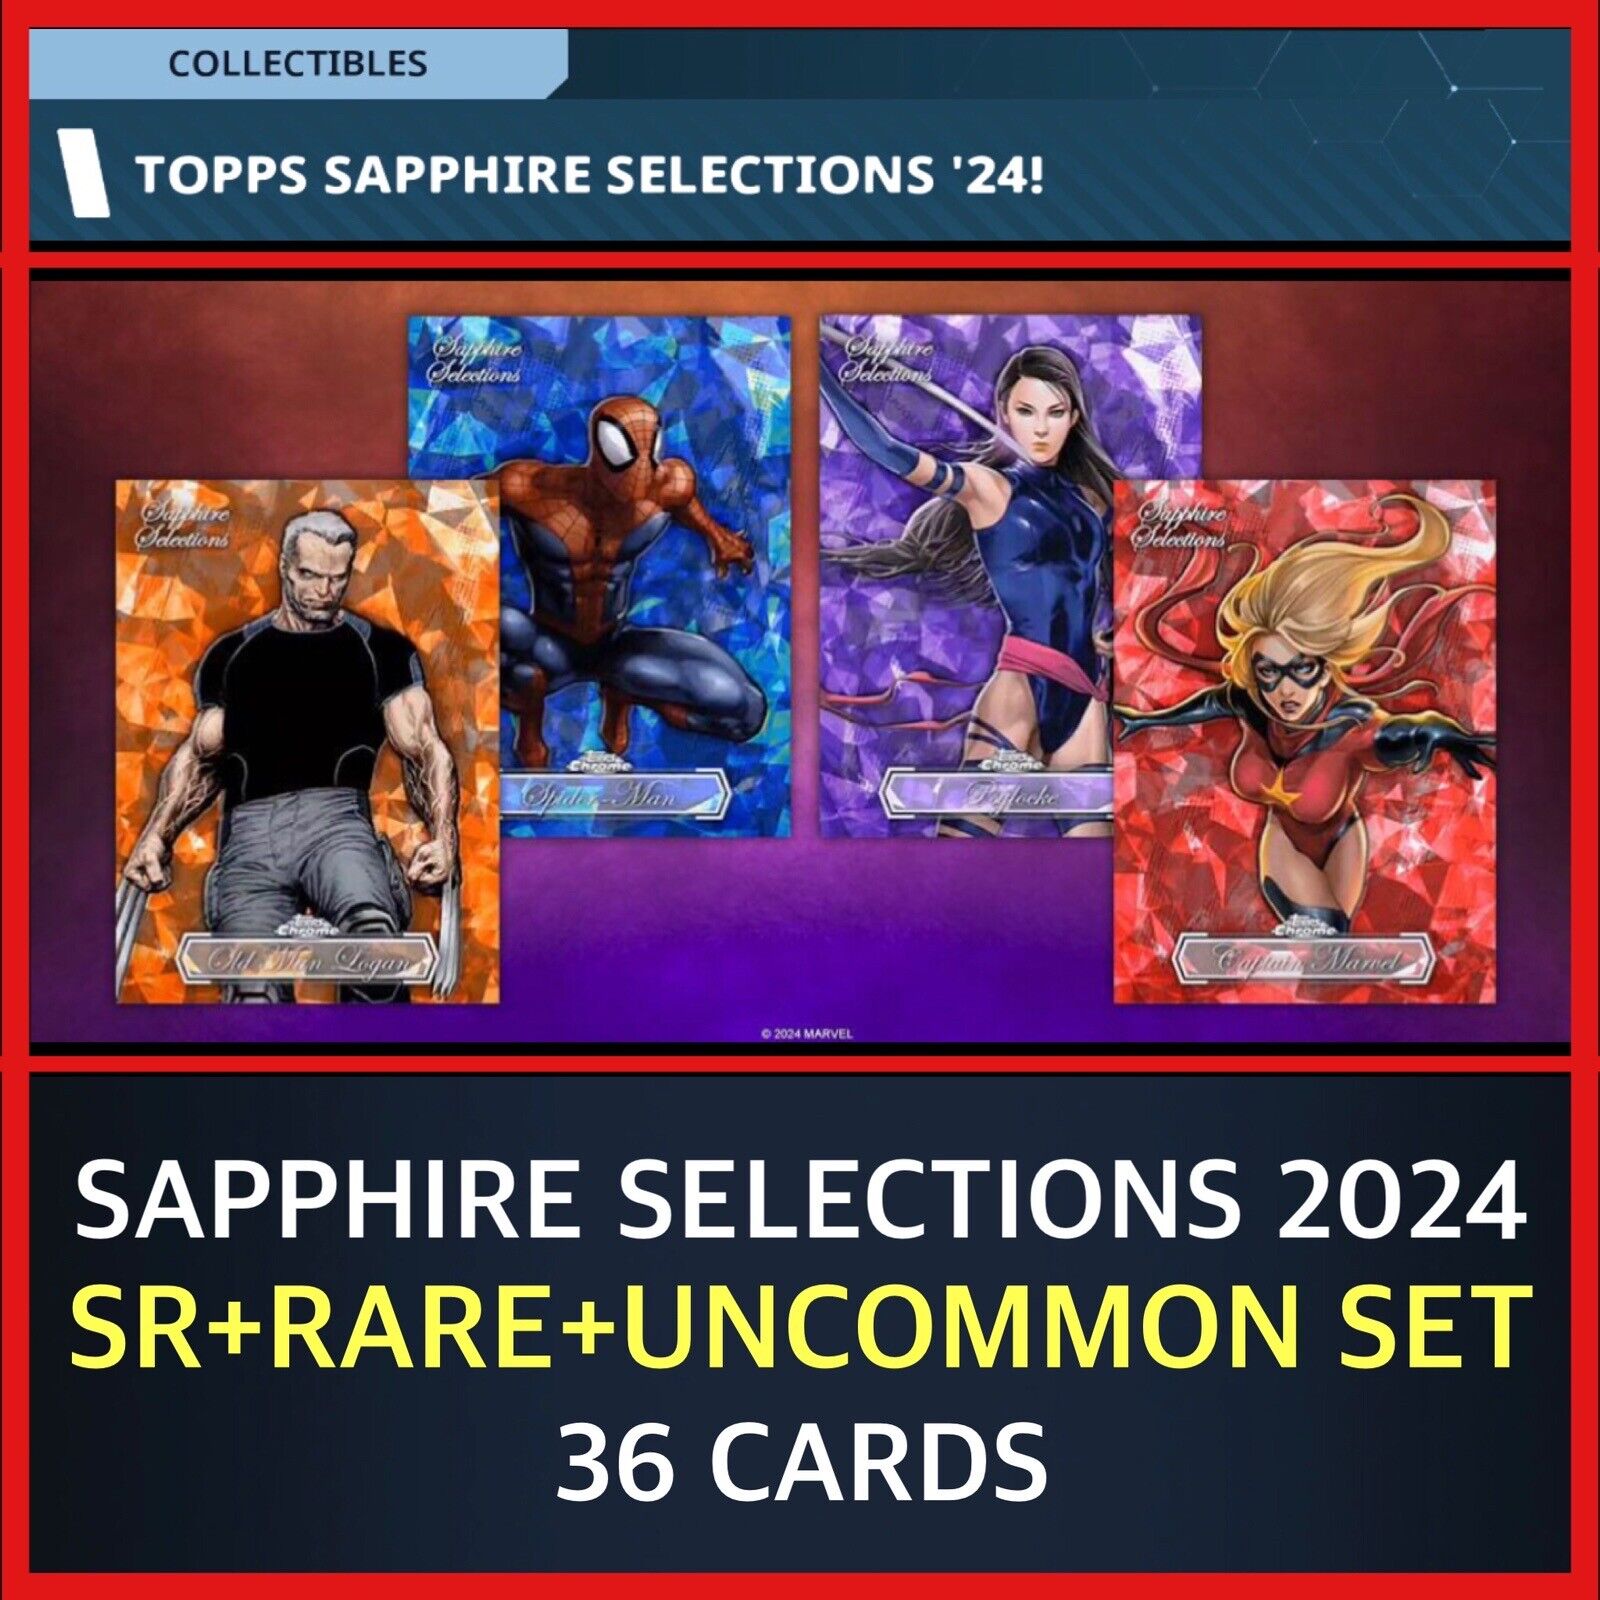 SAPPHIRE SELECTIONS 2024-ALL SR+RARE+UC 36 CARD SET-TOPPS MARVEL COLLECT DIGITAL